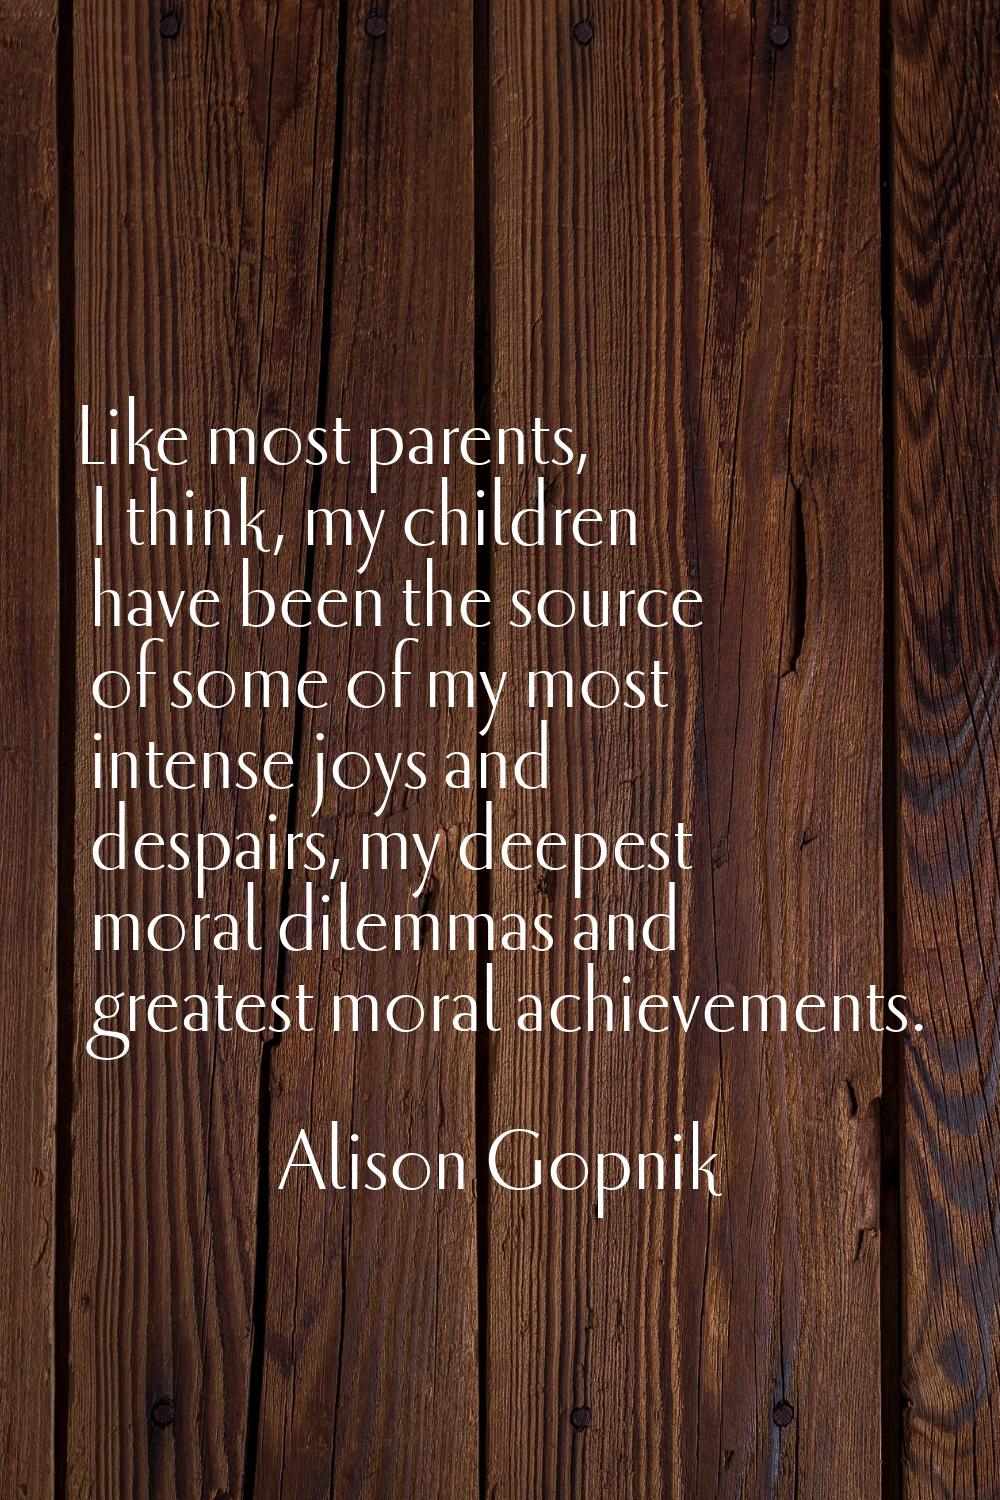 Like most parents, I think, my children have been the source of some of my most intense joys and de